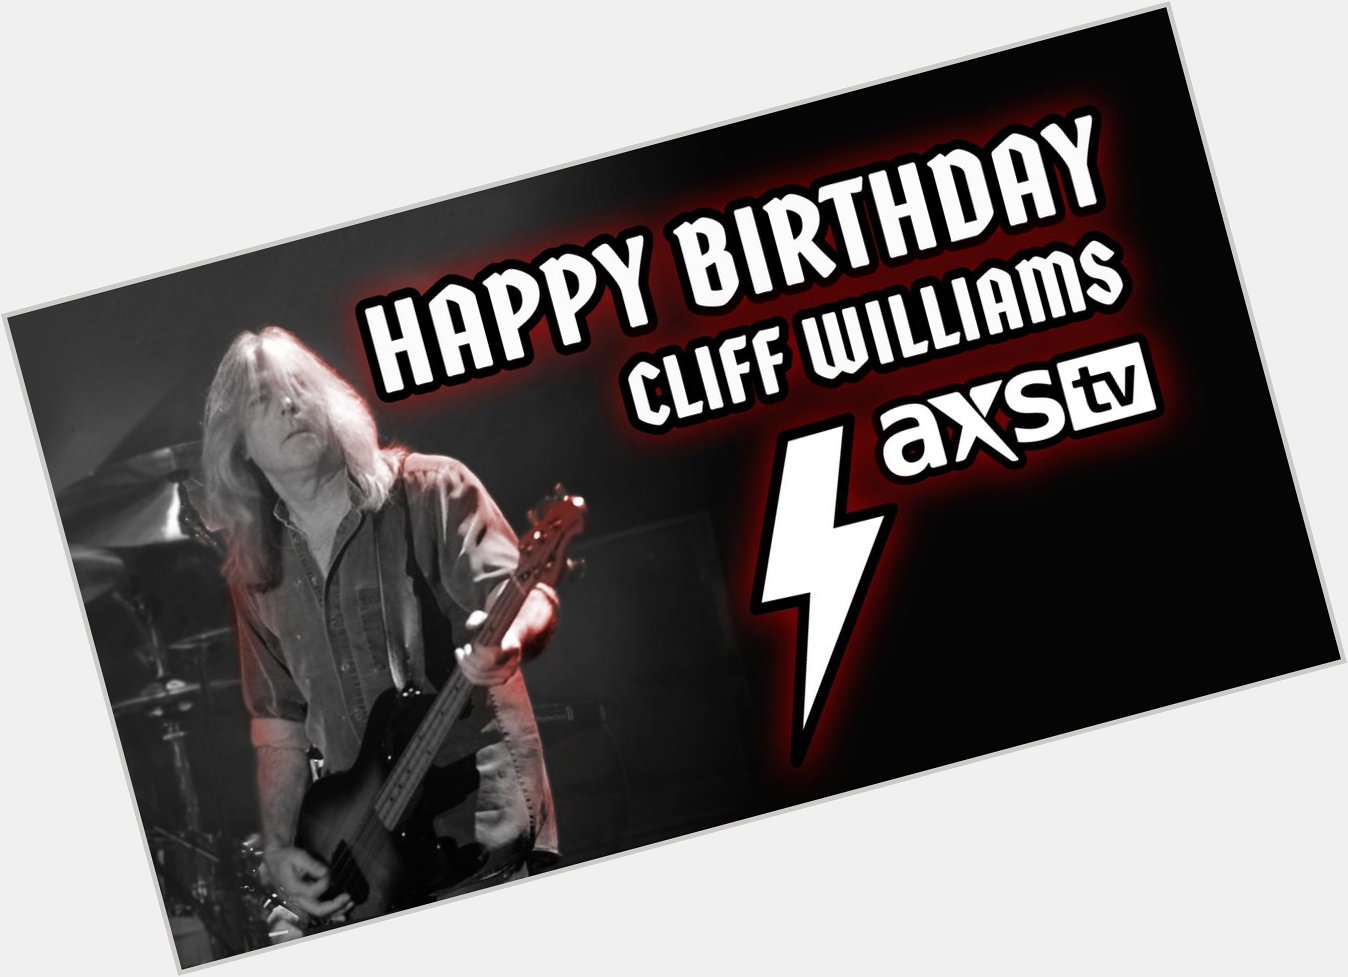 Today we\re wishing Cliff Williams a very Happy Birthday! Which album will you listen to today to celebrate? 